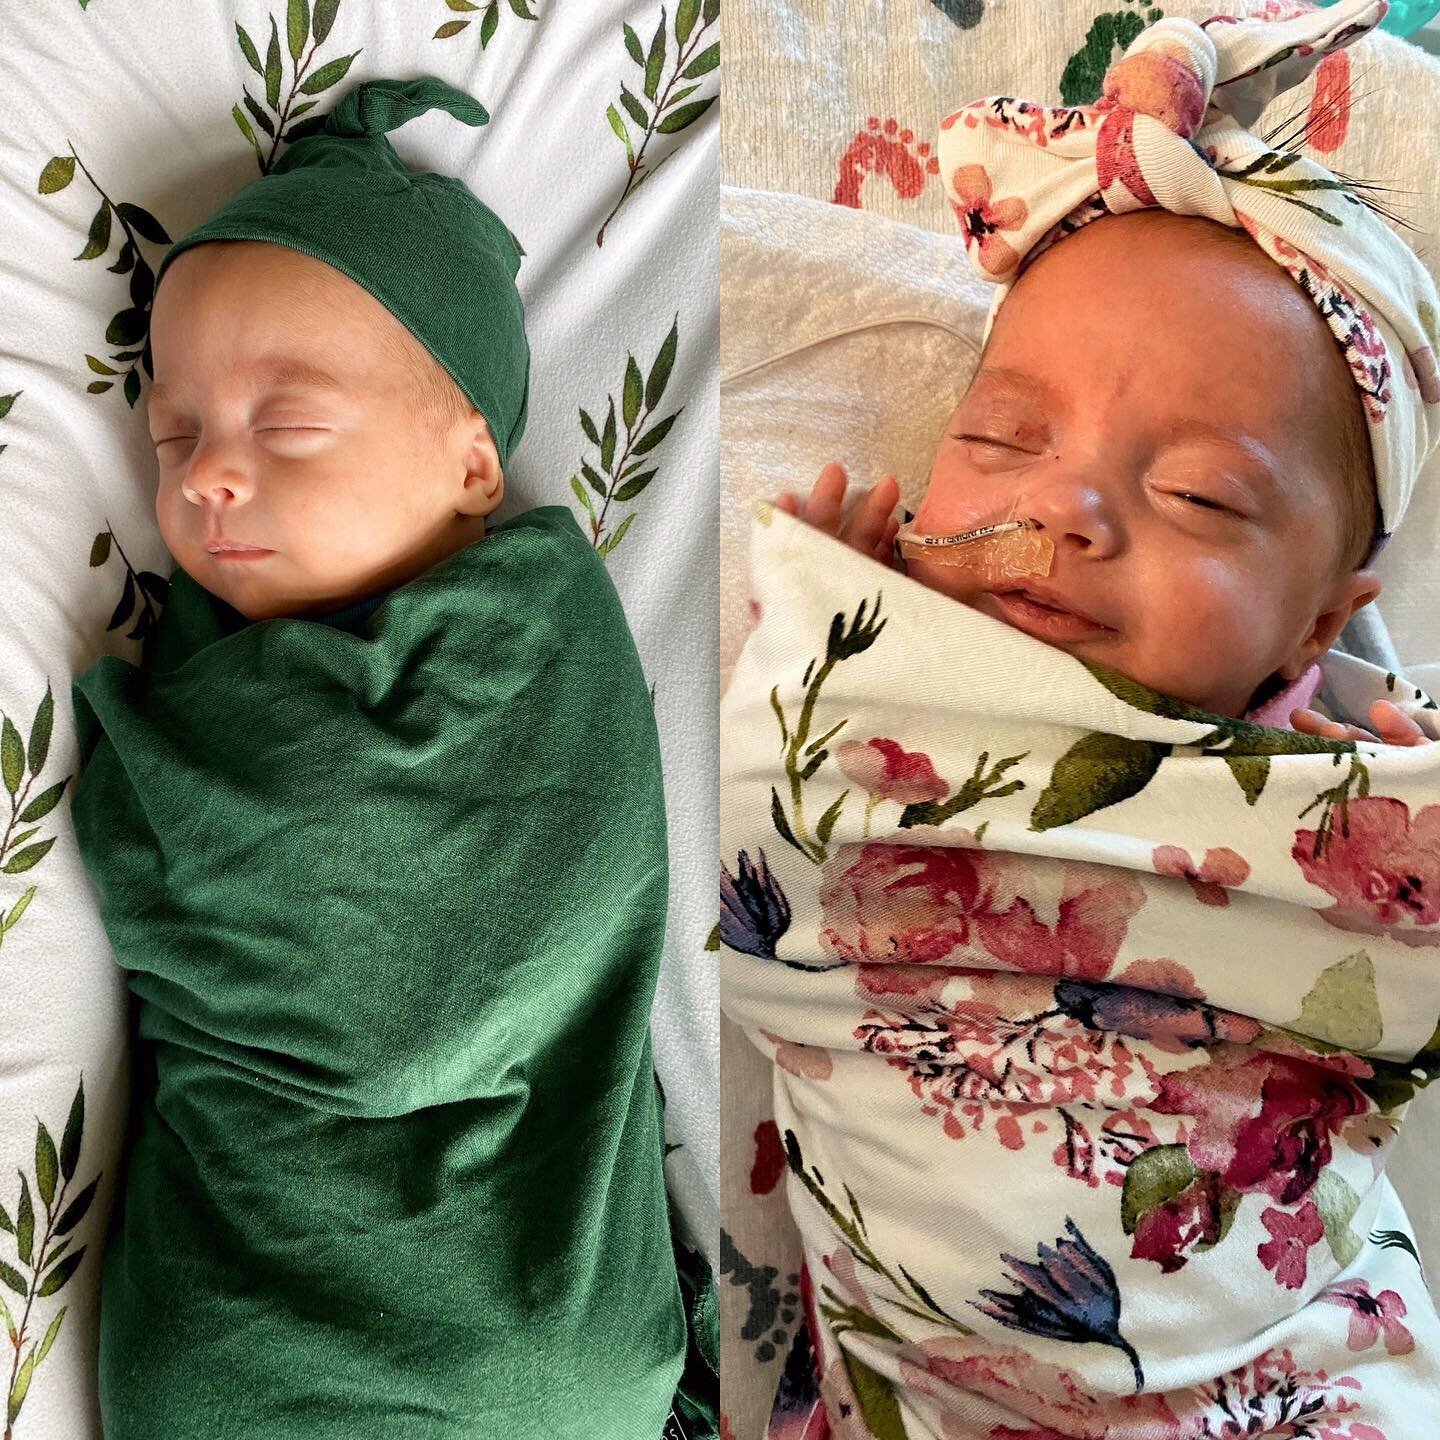 These babes are 3 months old today! Jude is home but Geanna has been transferred to another hospital as we will likely be moving forward with a procedure for her to have a gtube placed so she can come home. Poor babe is aspirating when she eats and h